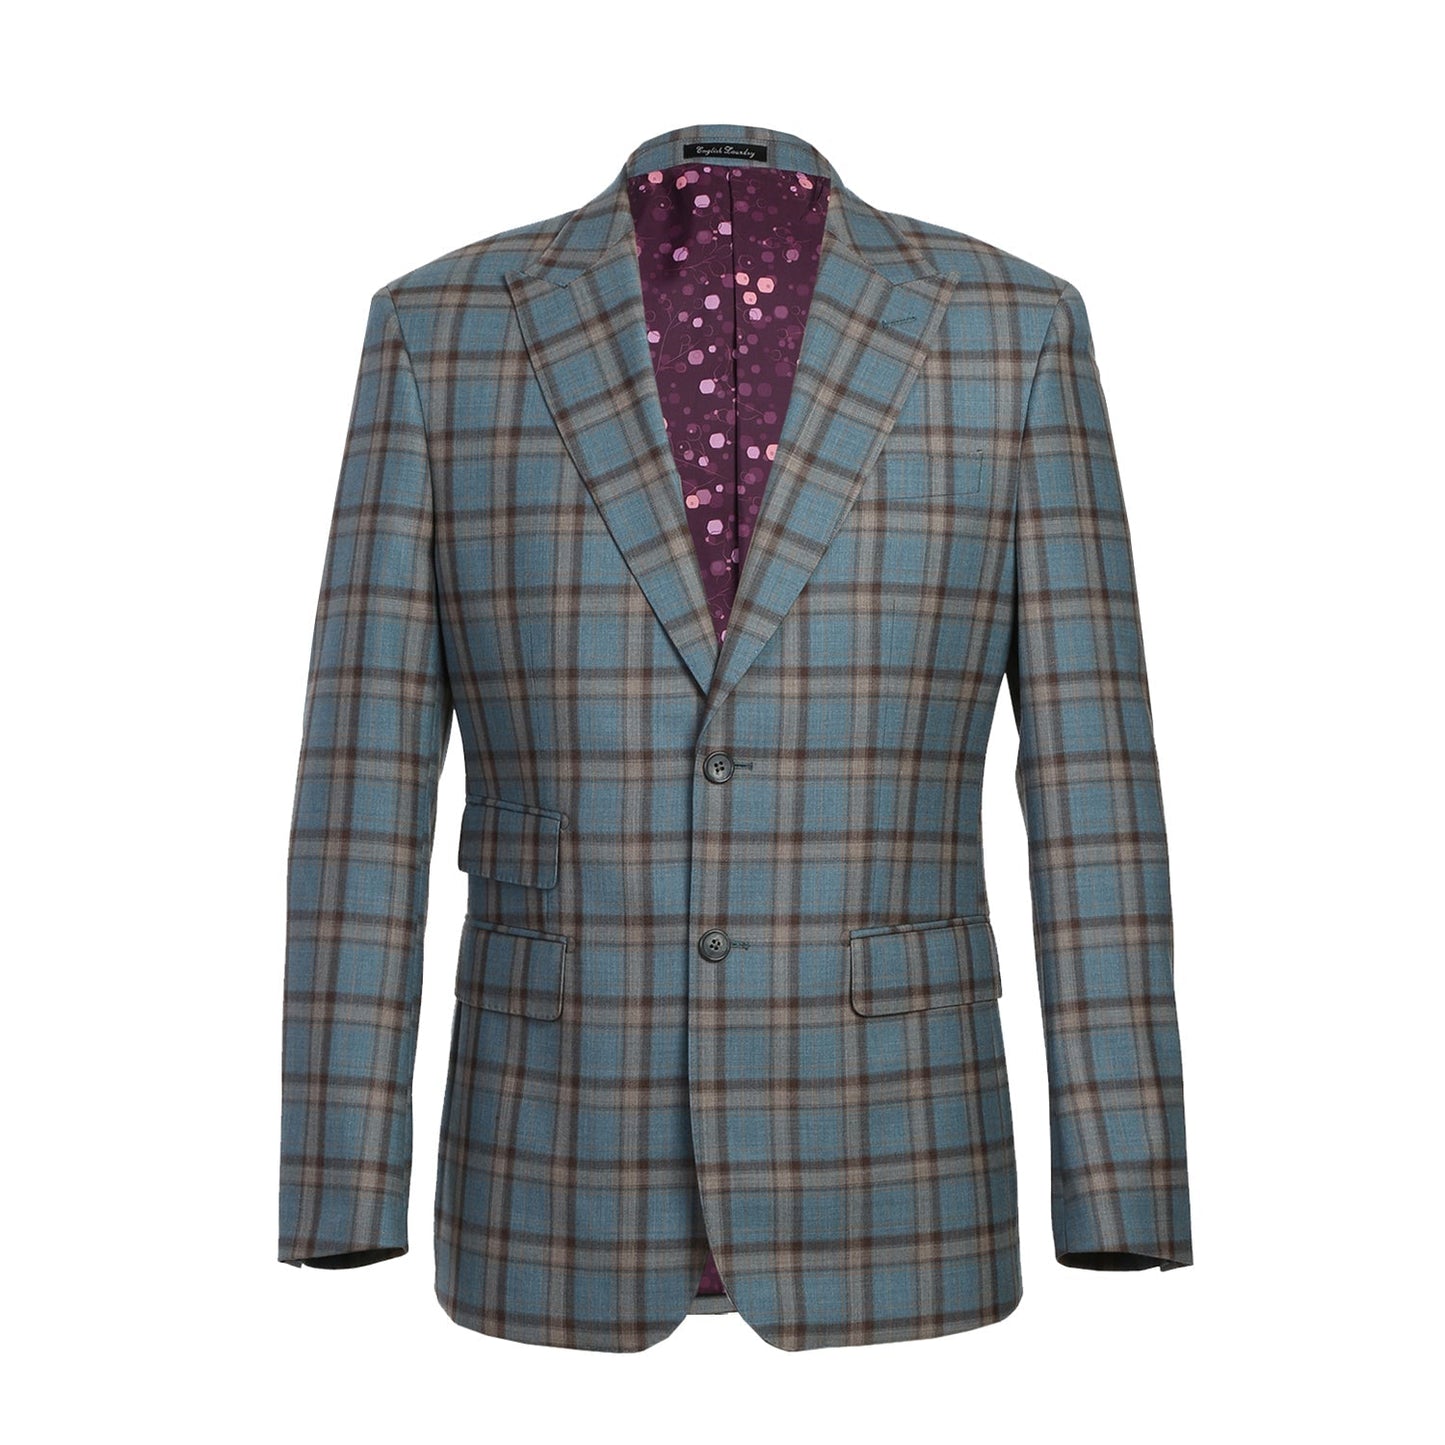 EL72-57-470 Slim Fit English Laundry Light Gray with Bronze Stereoscopic-Grid Wool Suit